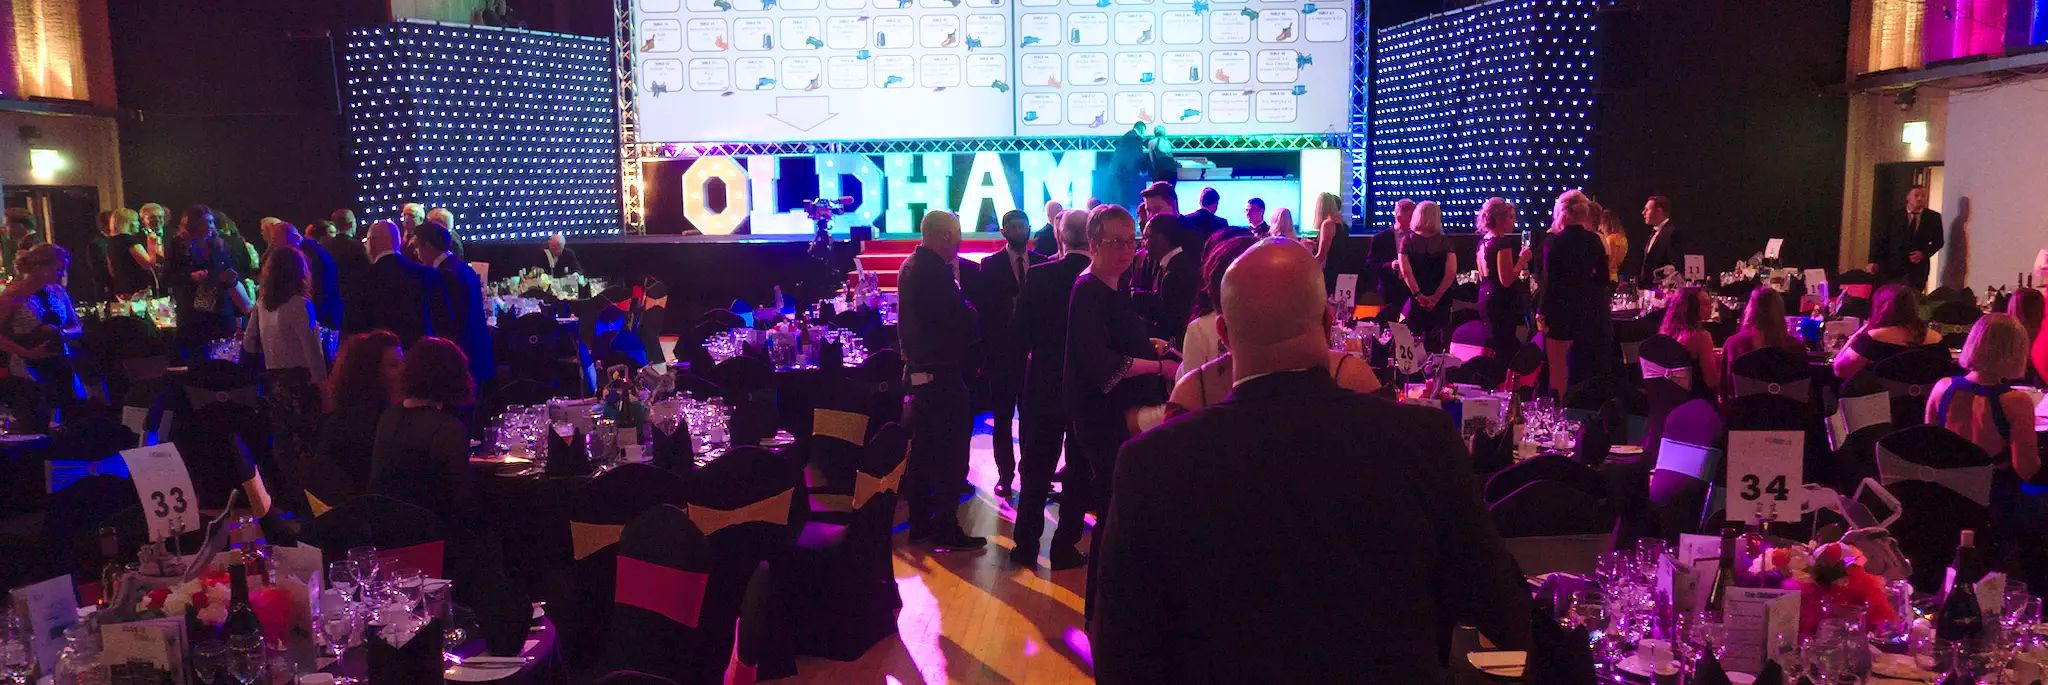 Oldham Business Awards 2020 Launch 